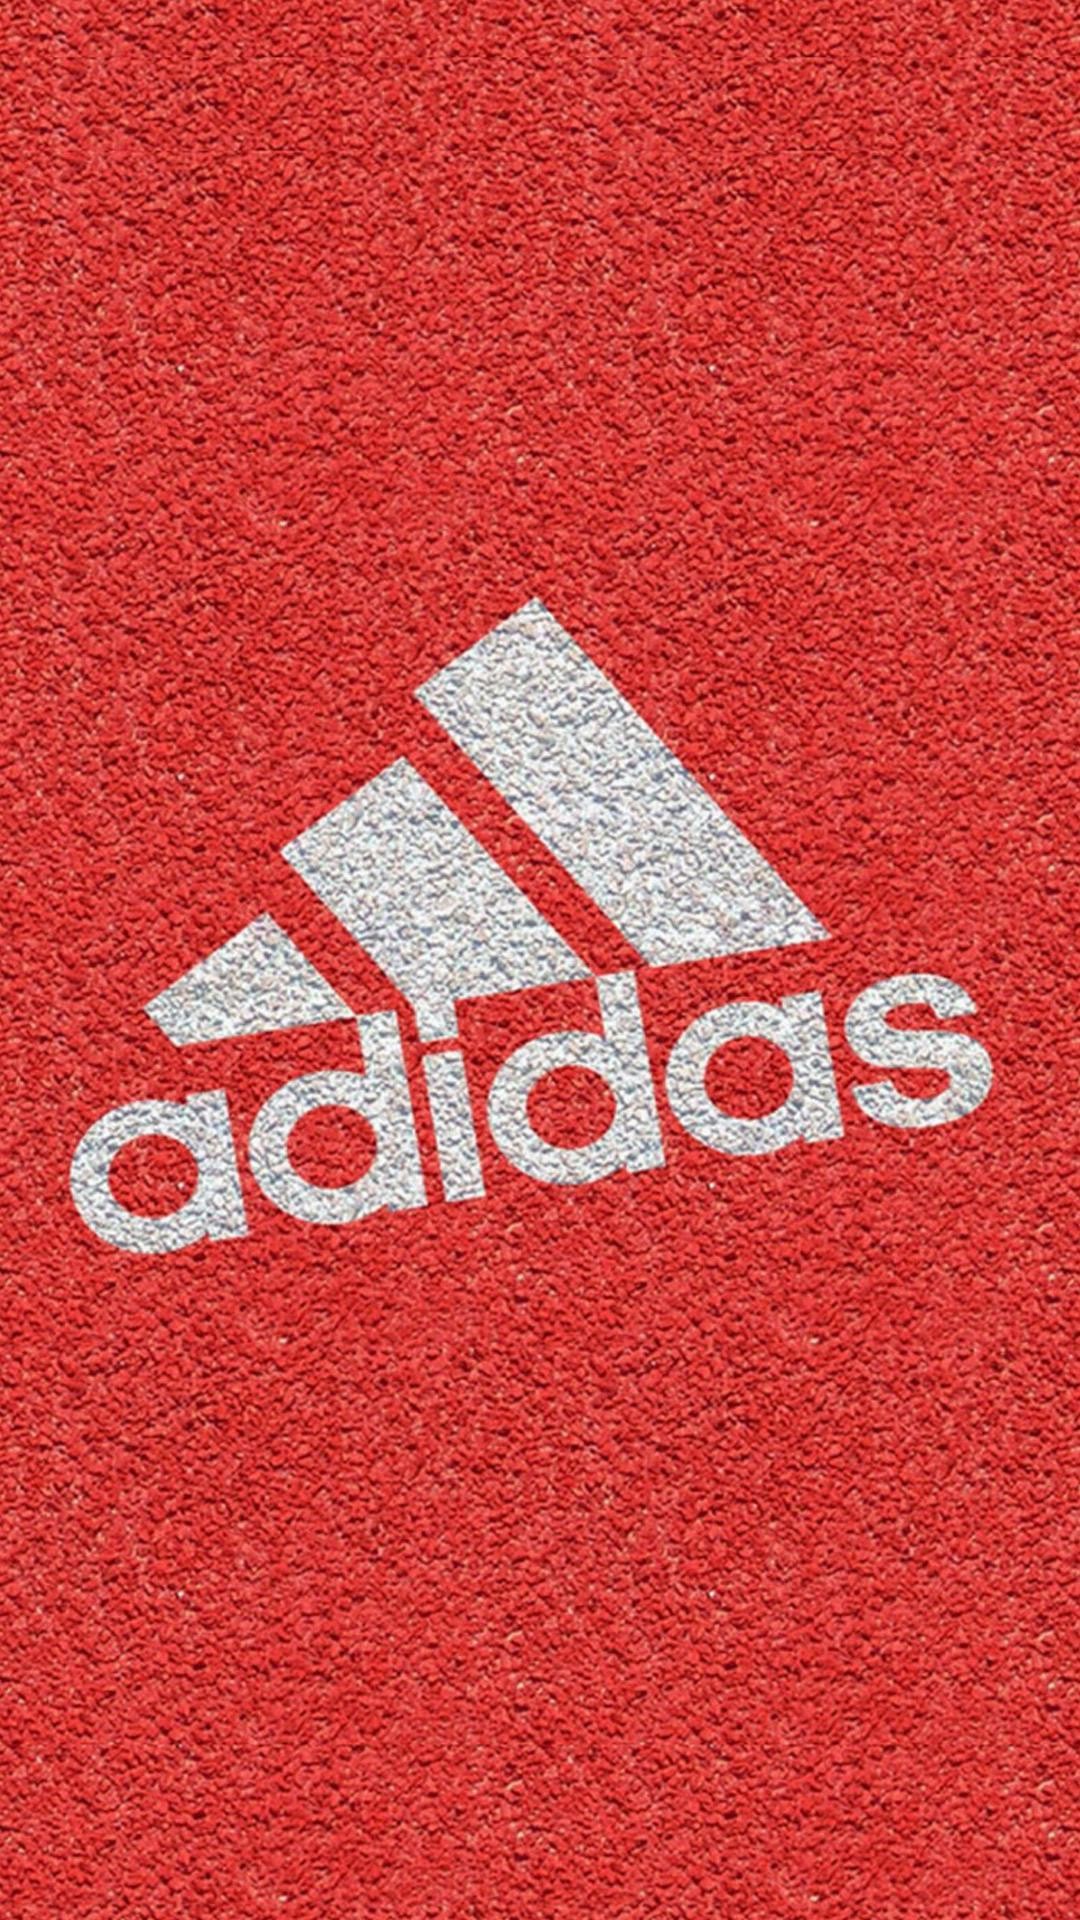 Wiki Red Adidas Iphone Background Pic Wpc0014250 
 - Adidas Logo Wallpaper Iphone X - HD Wallpaper 